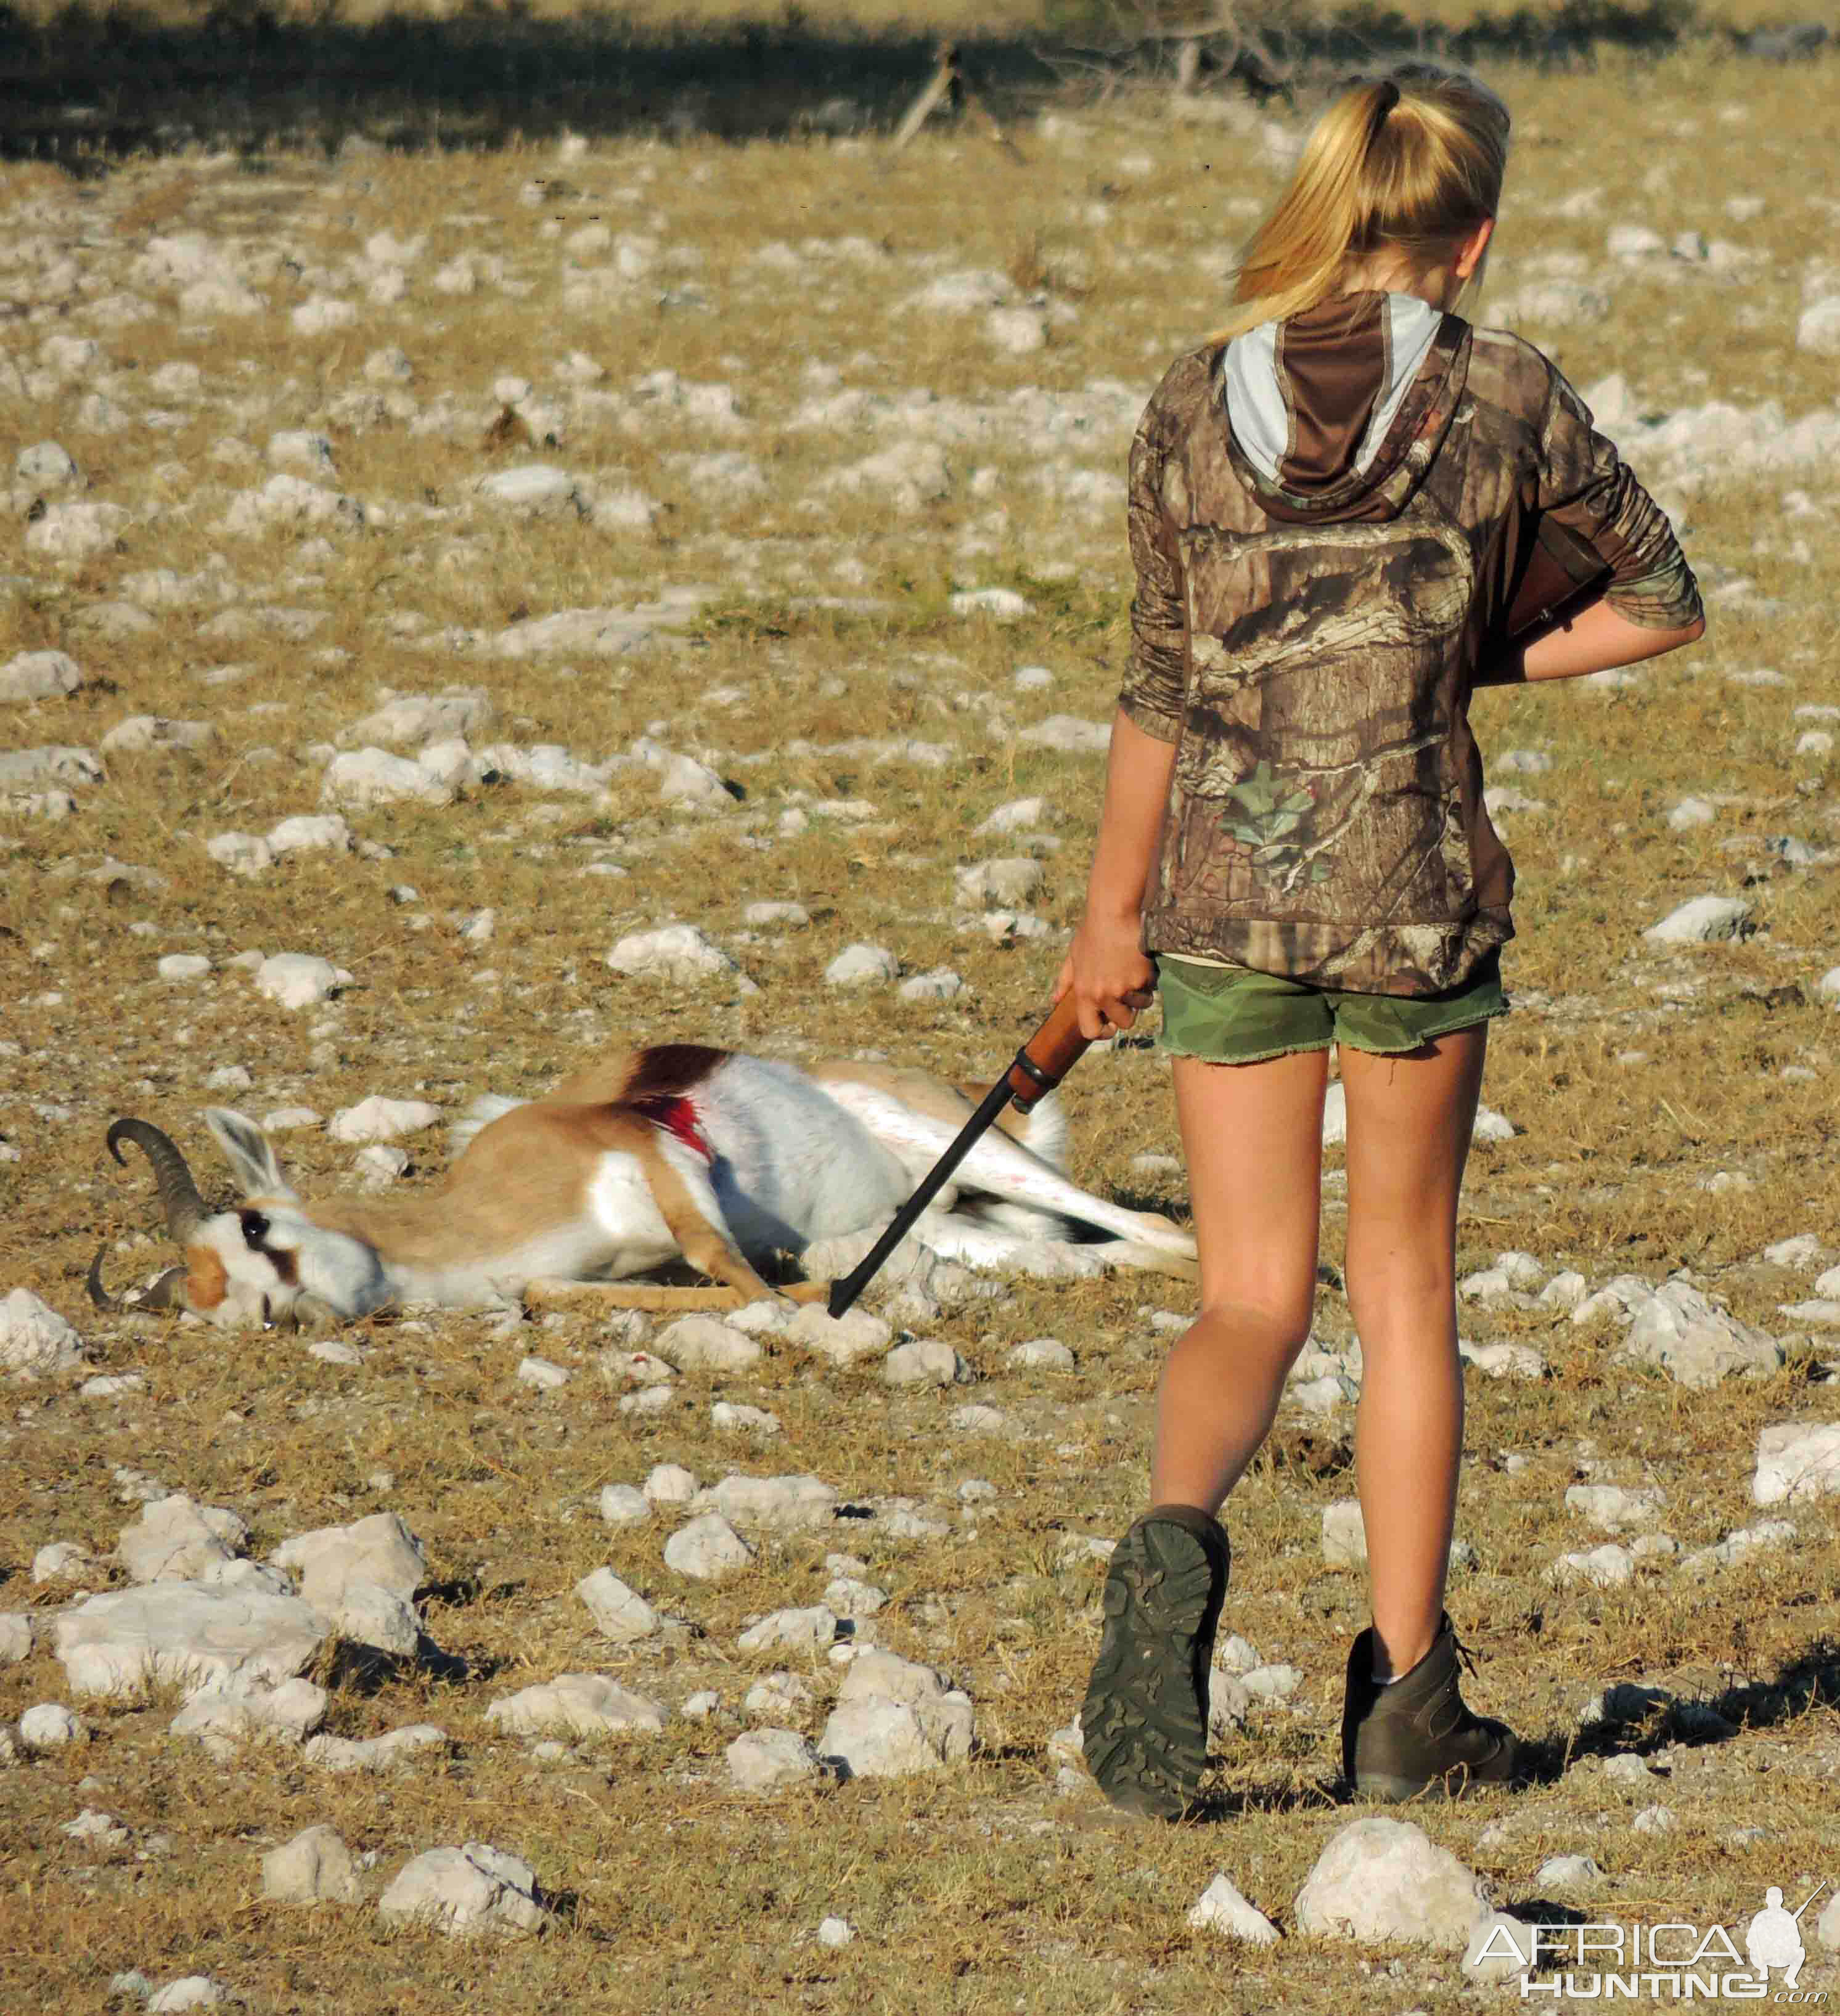 My daughter approaching the Springbok she had just taken at 160 meters. Perfect shot placement!